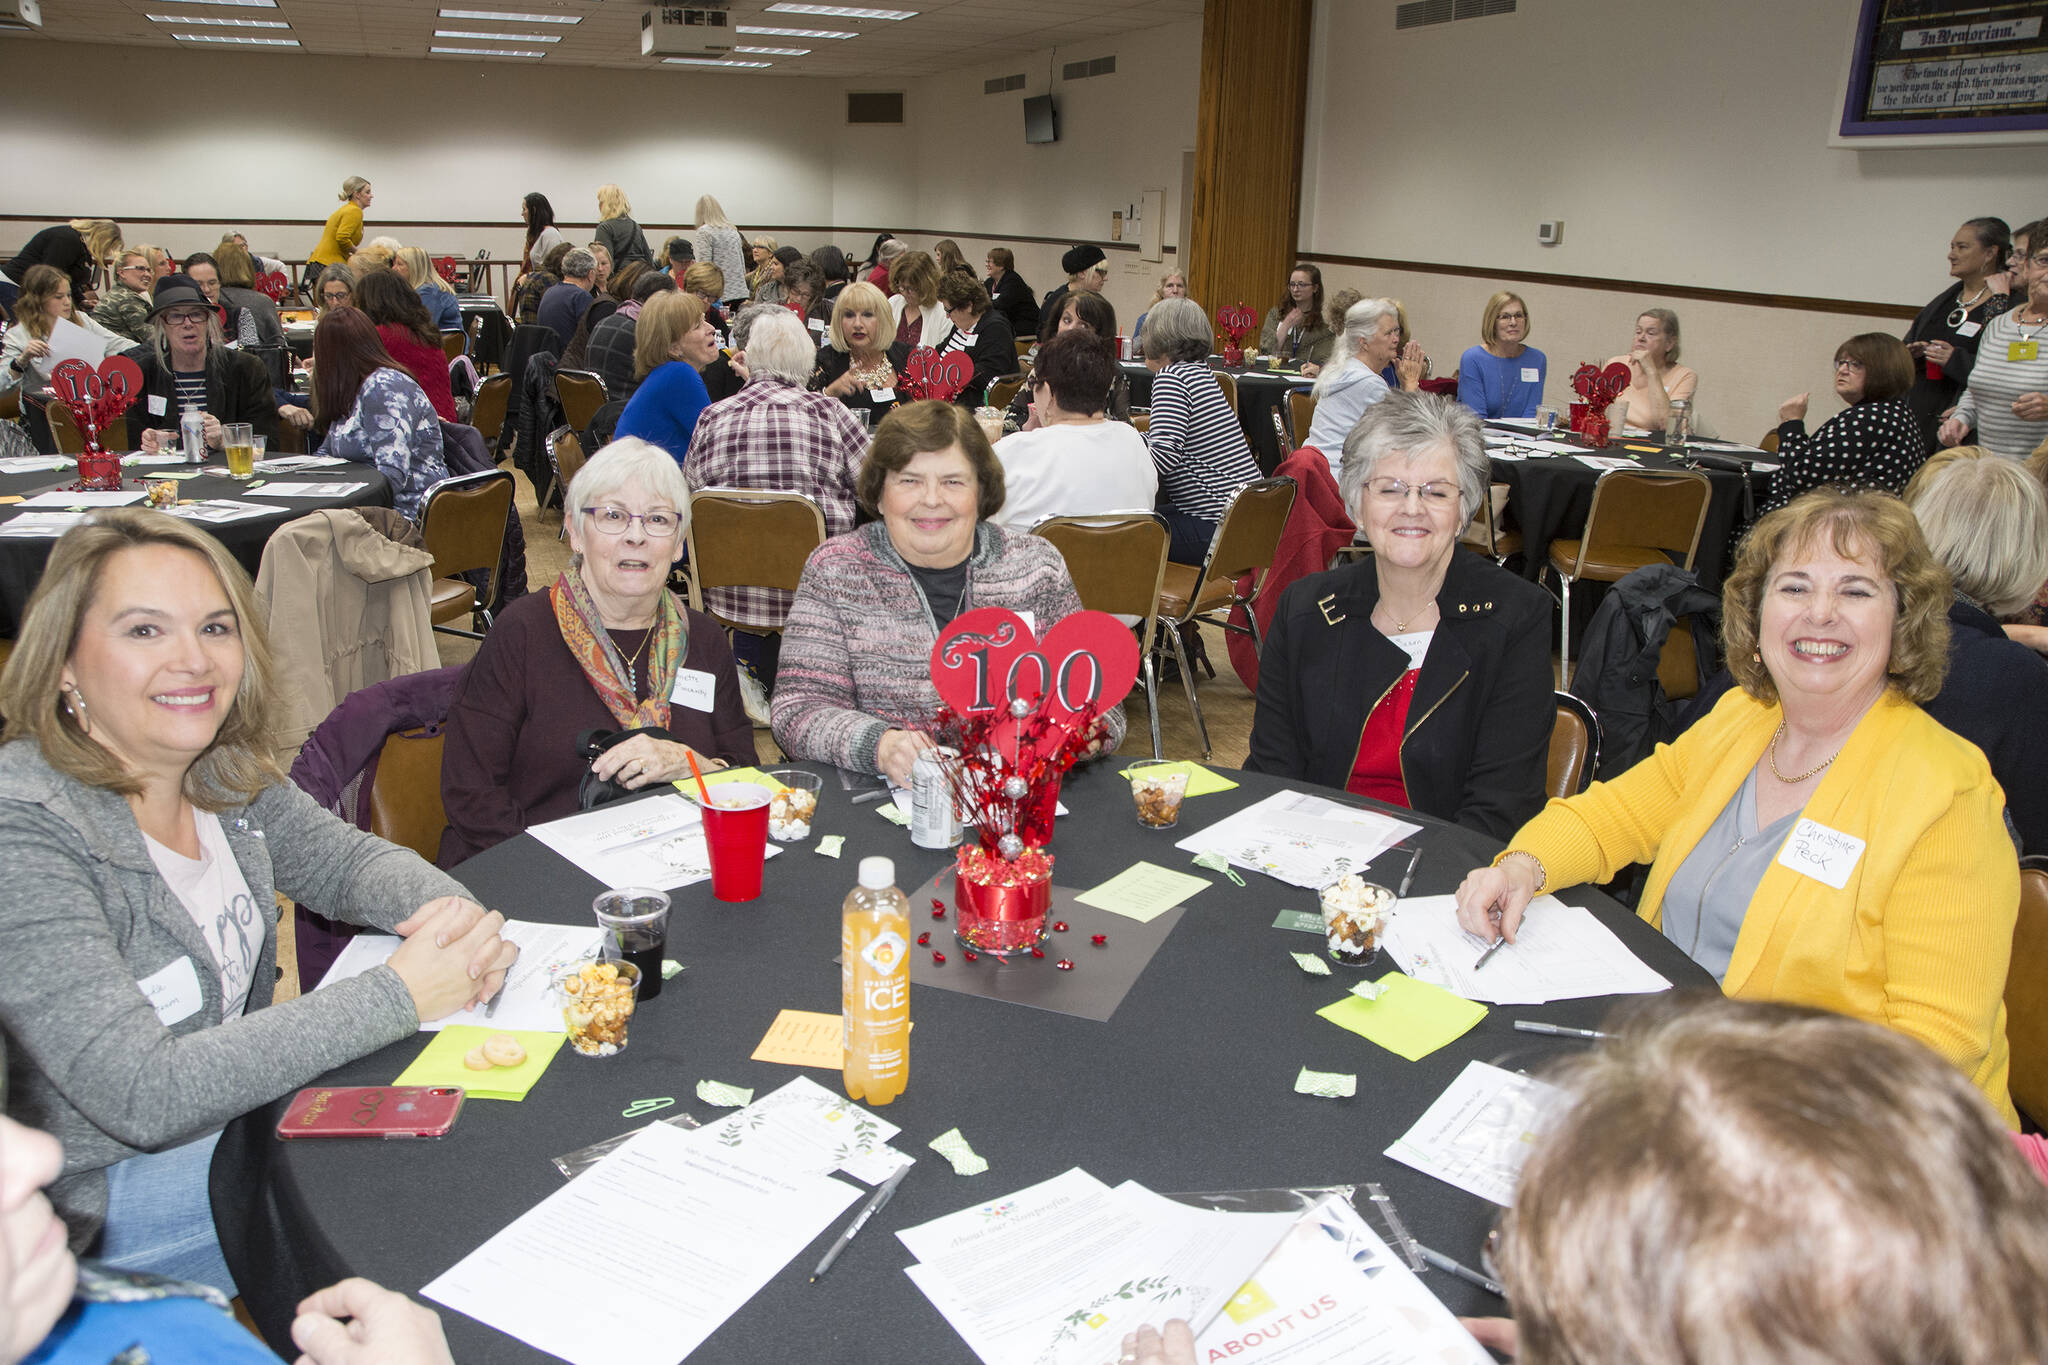 Provided photo 
The 2019 100+ Harbor Women Who Care event raised $16,000 for The Cancer Alliance of Grays Harbor. On Tuesday night, Oct. 11, the event will be held for a second time. Doors open for socializing at 5:15 p.m., with the program starting at 6 p.m. The presentations from the nonprofit organizations are 10 minutes each, with a short question-and-answer session afterward.